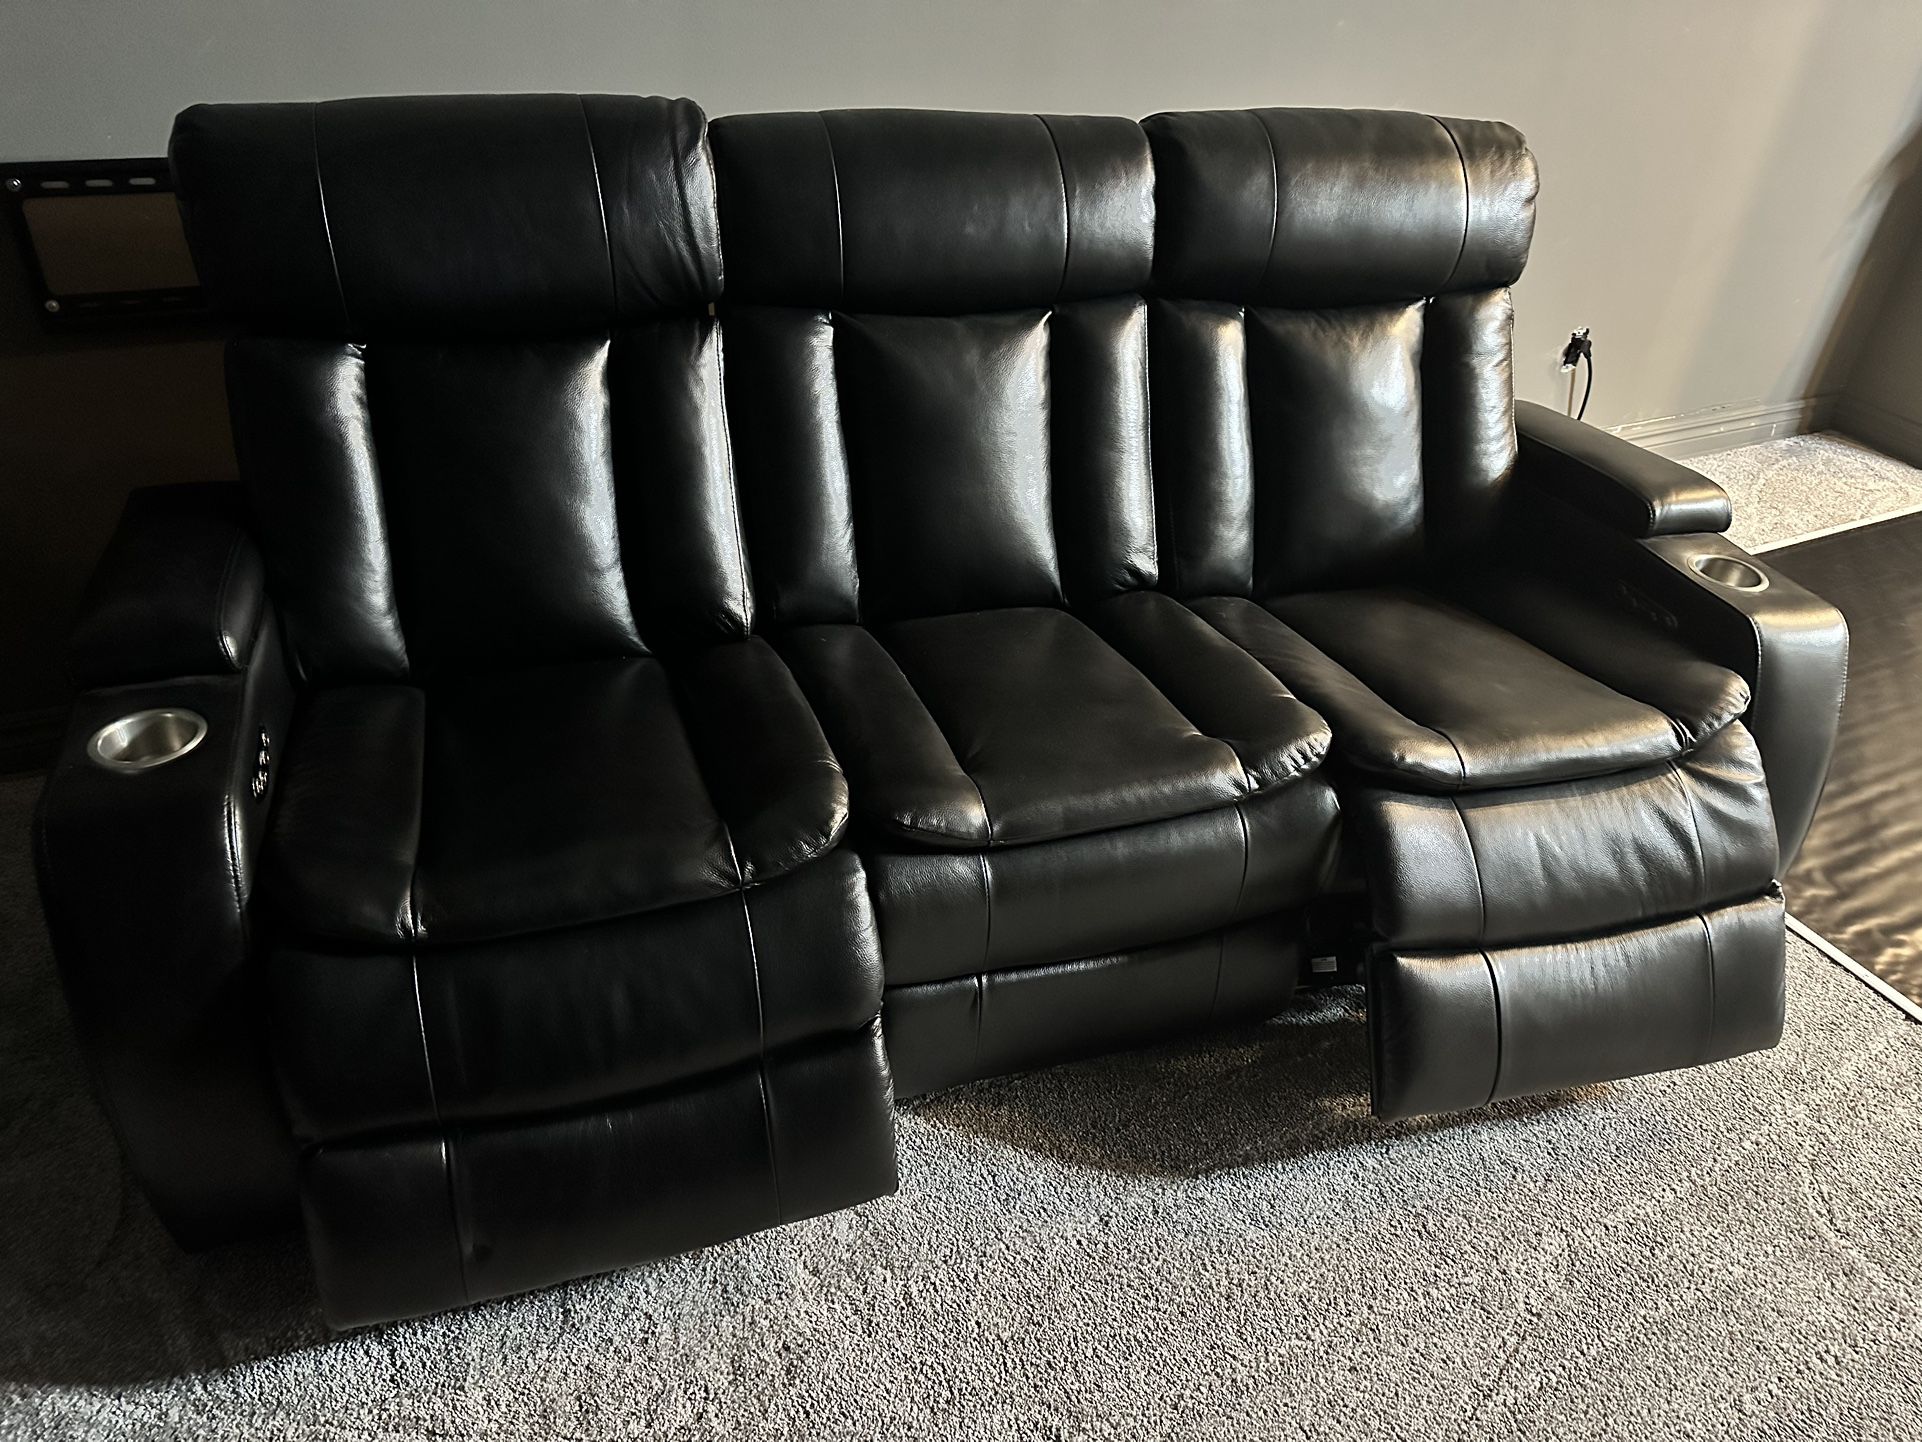 EAGER TO SELL BRAND NEW BARELY USED ELECTRIC RECLINING THEATER CHAIRS/SOFAS